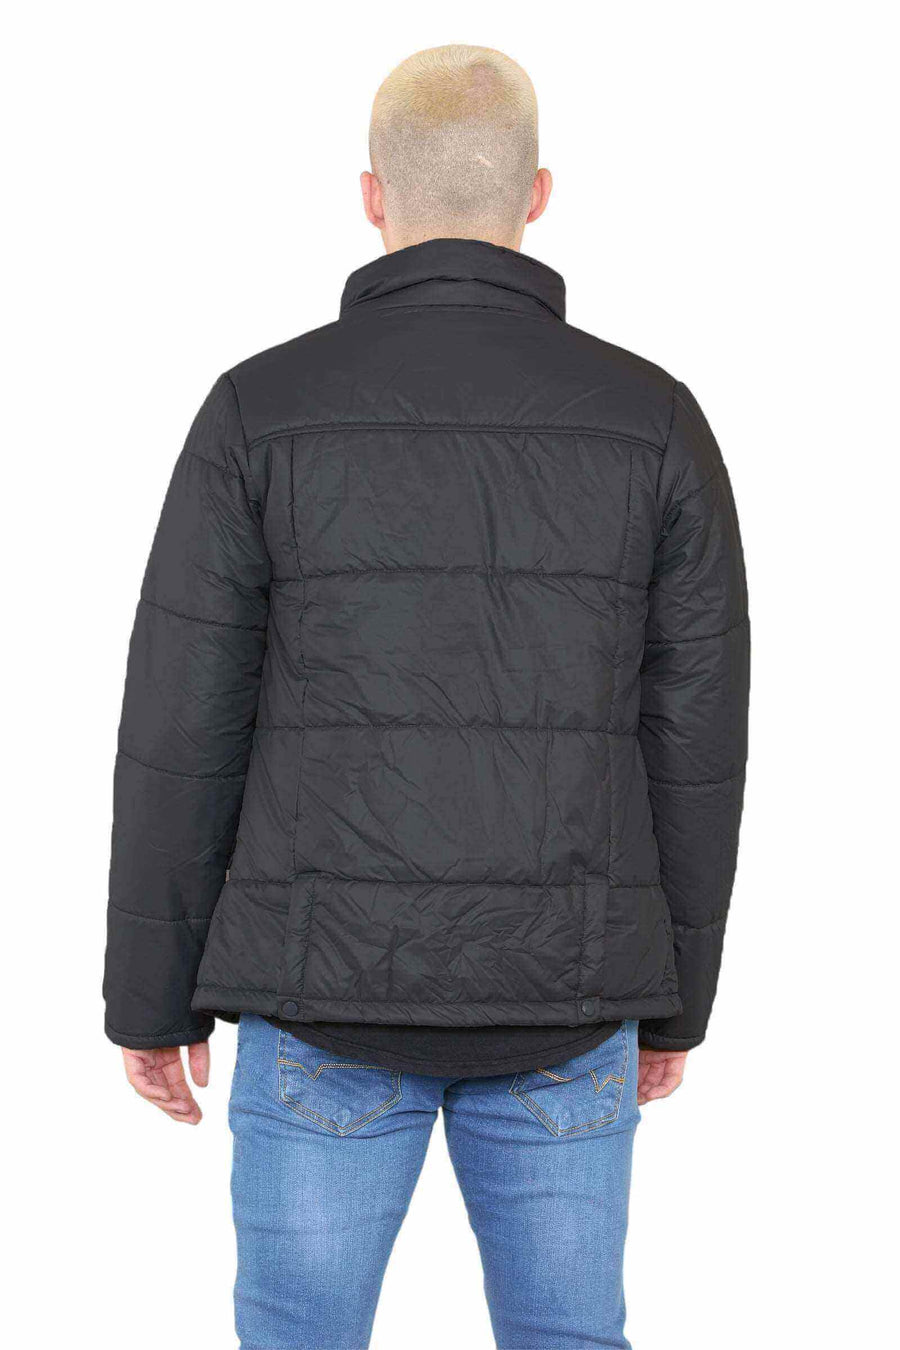 Back View of Men's Puffer Jacket in Black